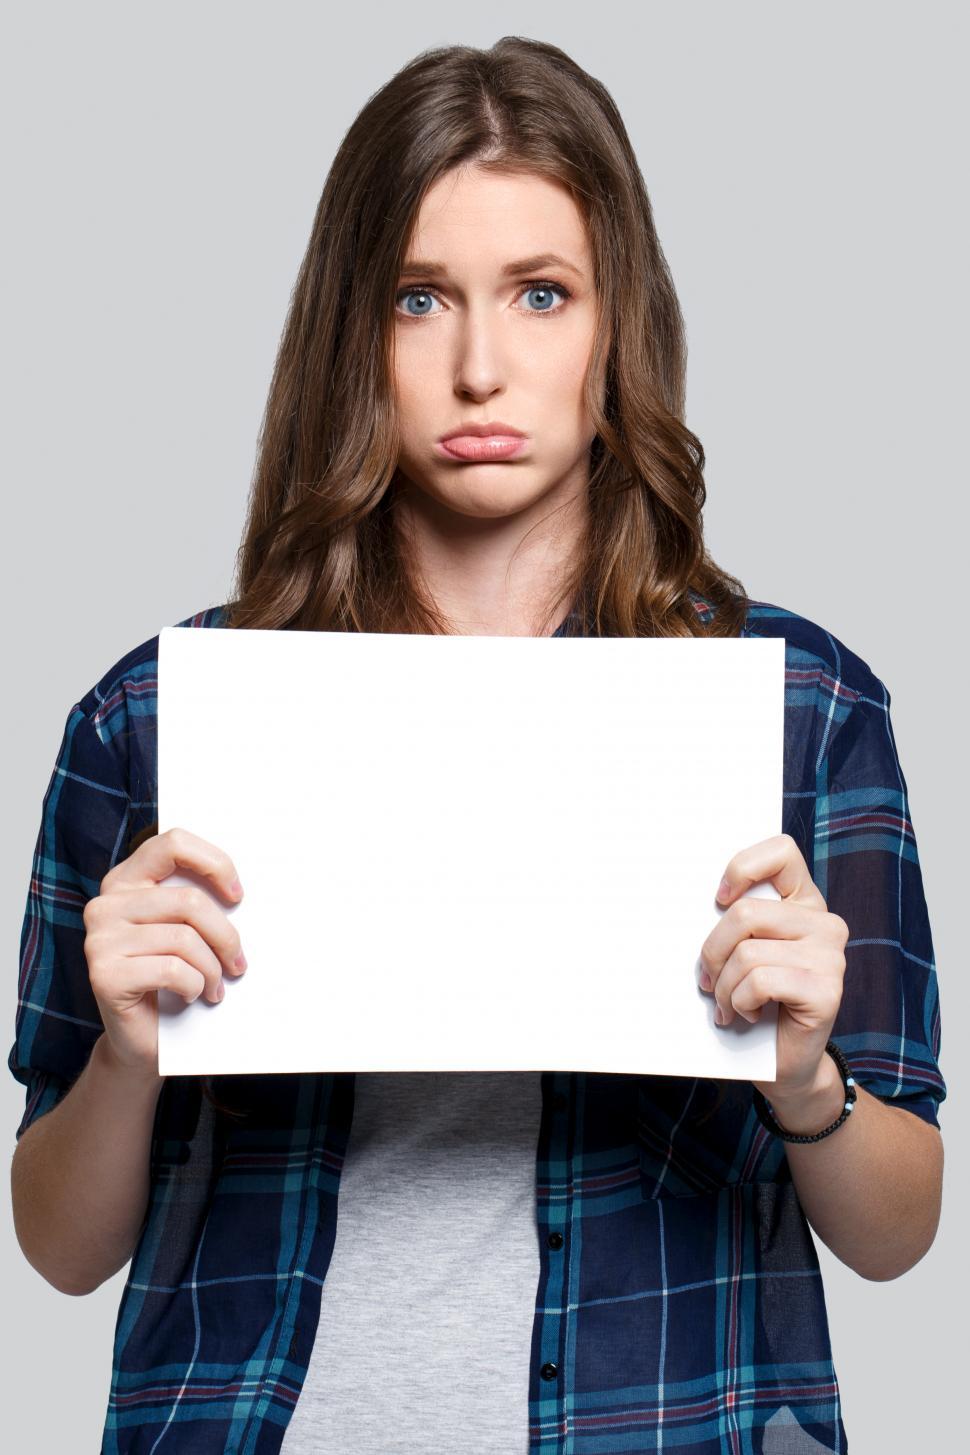 Free Image of Girl holding blank white card, looking concerned 